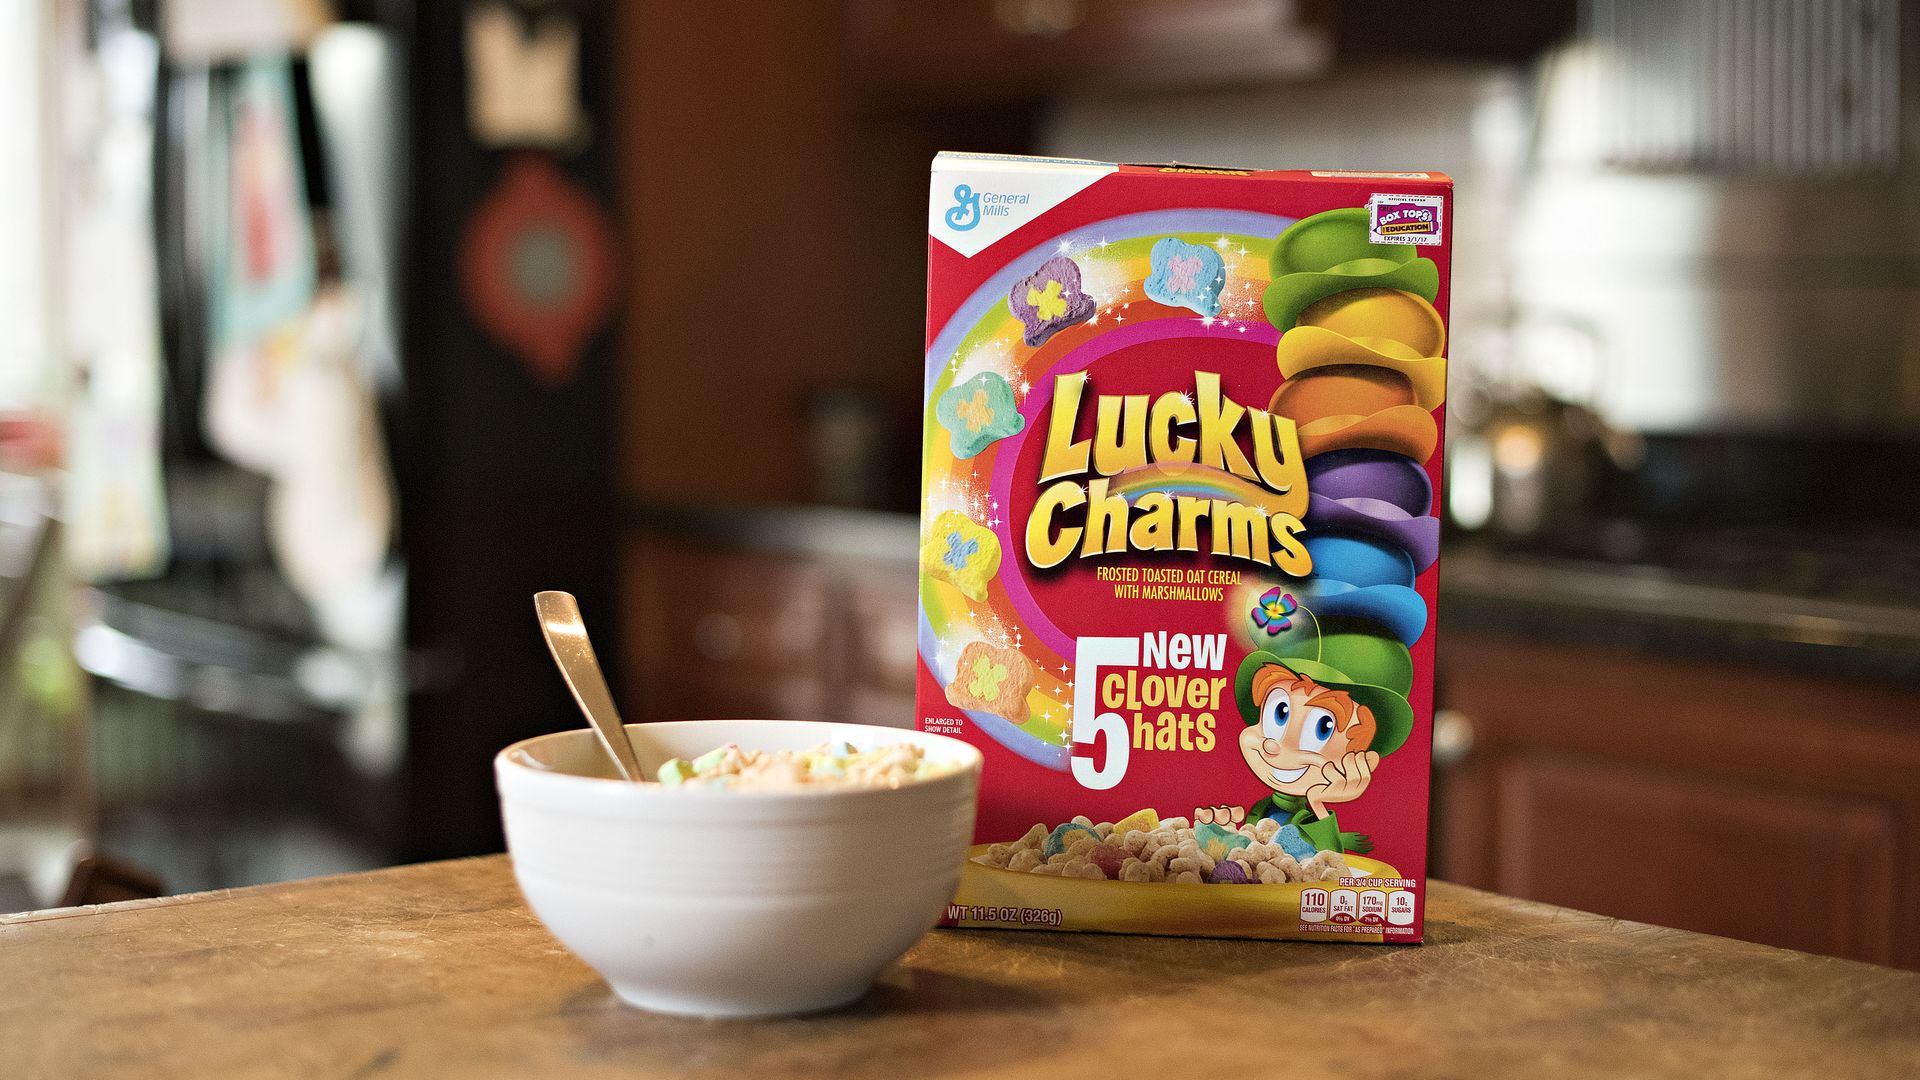 FDA is investigating Lucky Charms after reports of illness